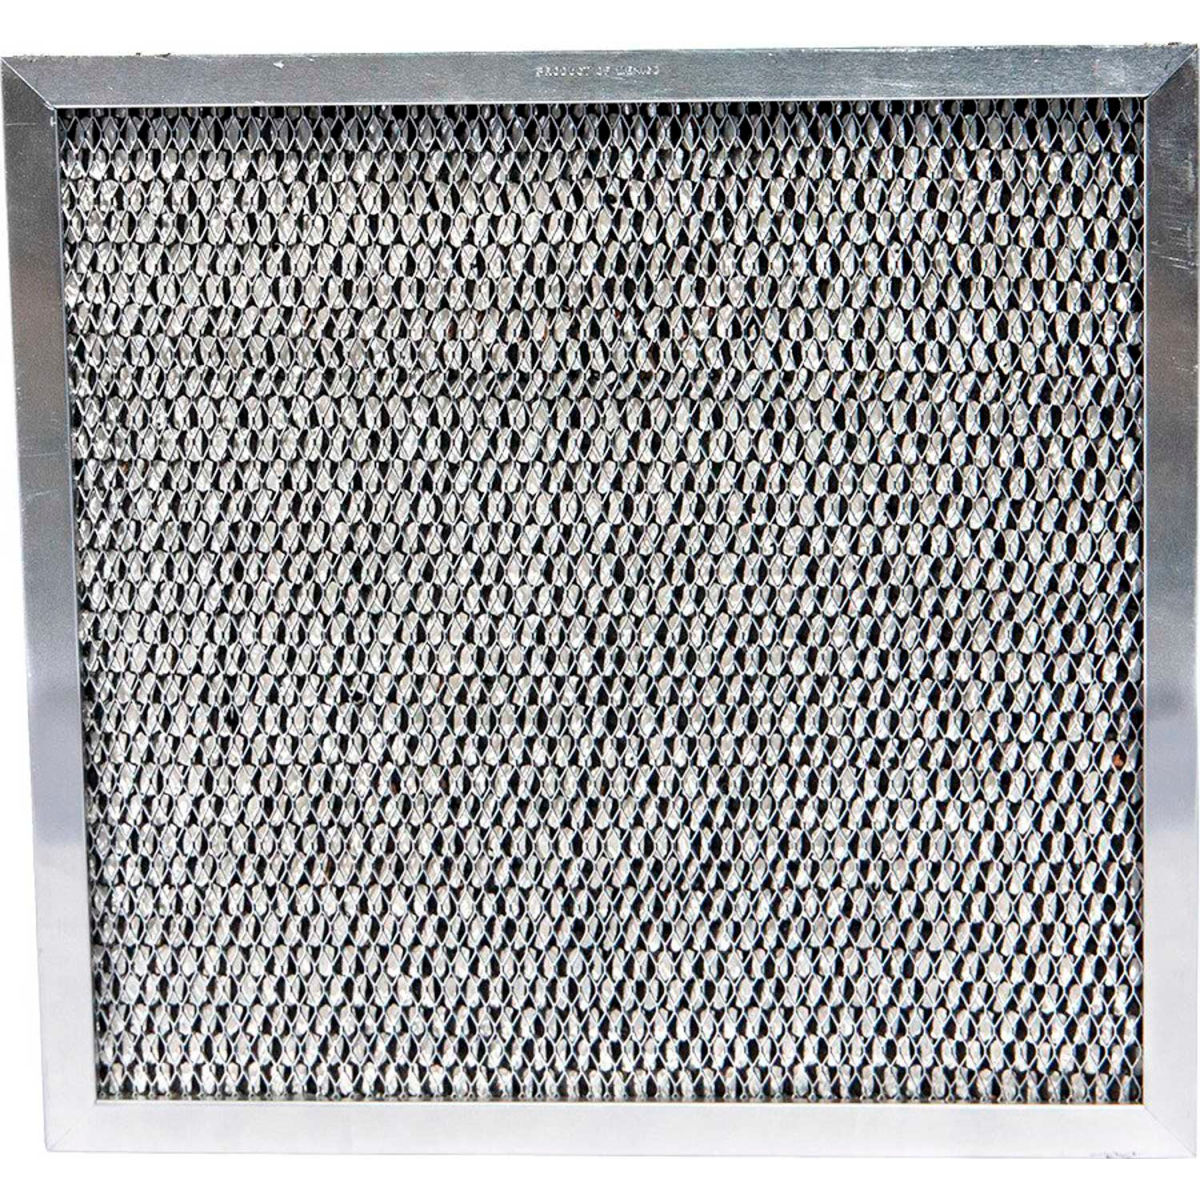 Picture of Dri-Eaz Products B2299265 F581 4-Pro Dehumidifier Filter for DrizAir 1200 & LGR 7000XLi - Pack of 3